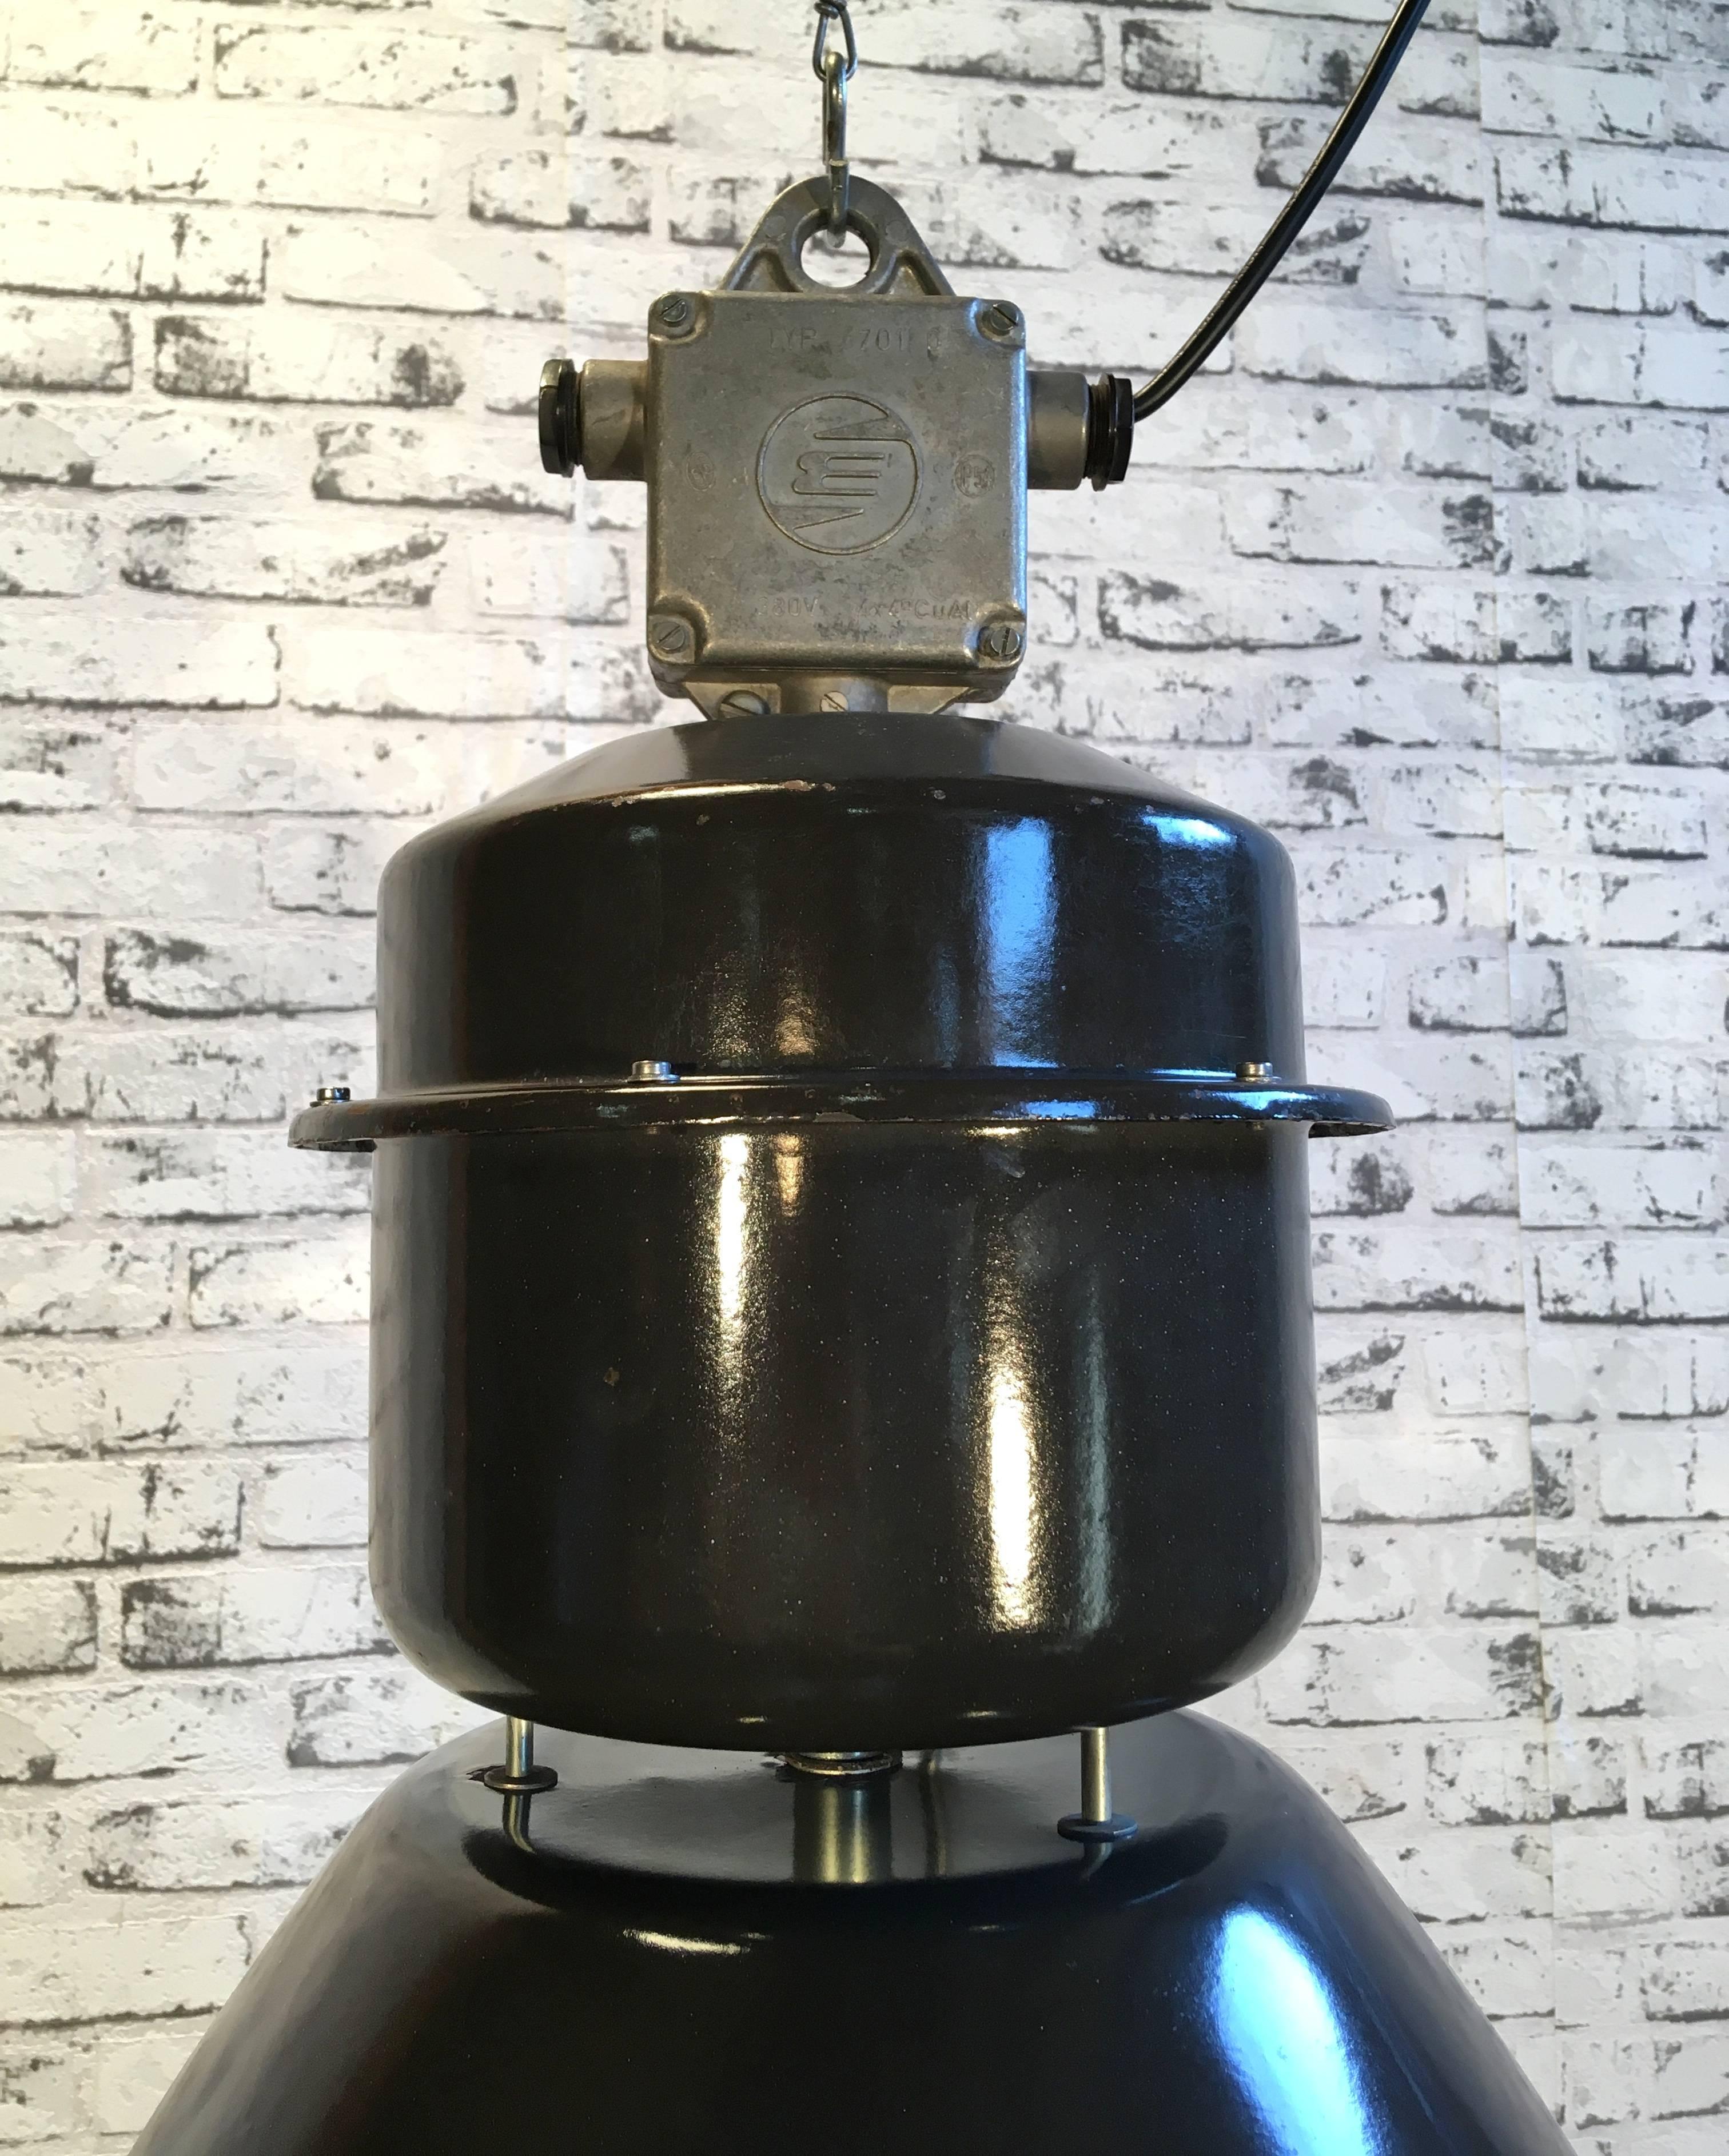 This industrial black enamel pendant light was designed in the 1960s and produced by Elektrosvit in the former Czechoslovakia. It features a cast aluminium top,a black enamel exterior, a white enamel interior and clear glass cover. New porcelain